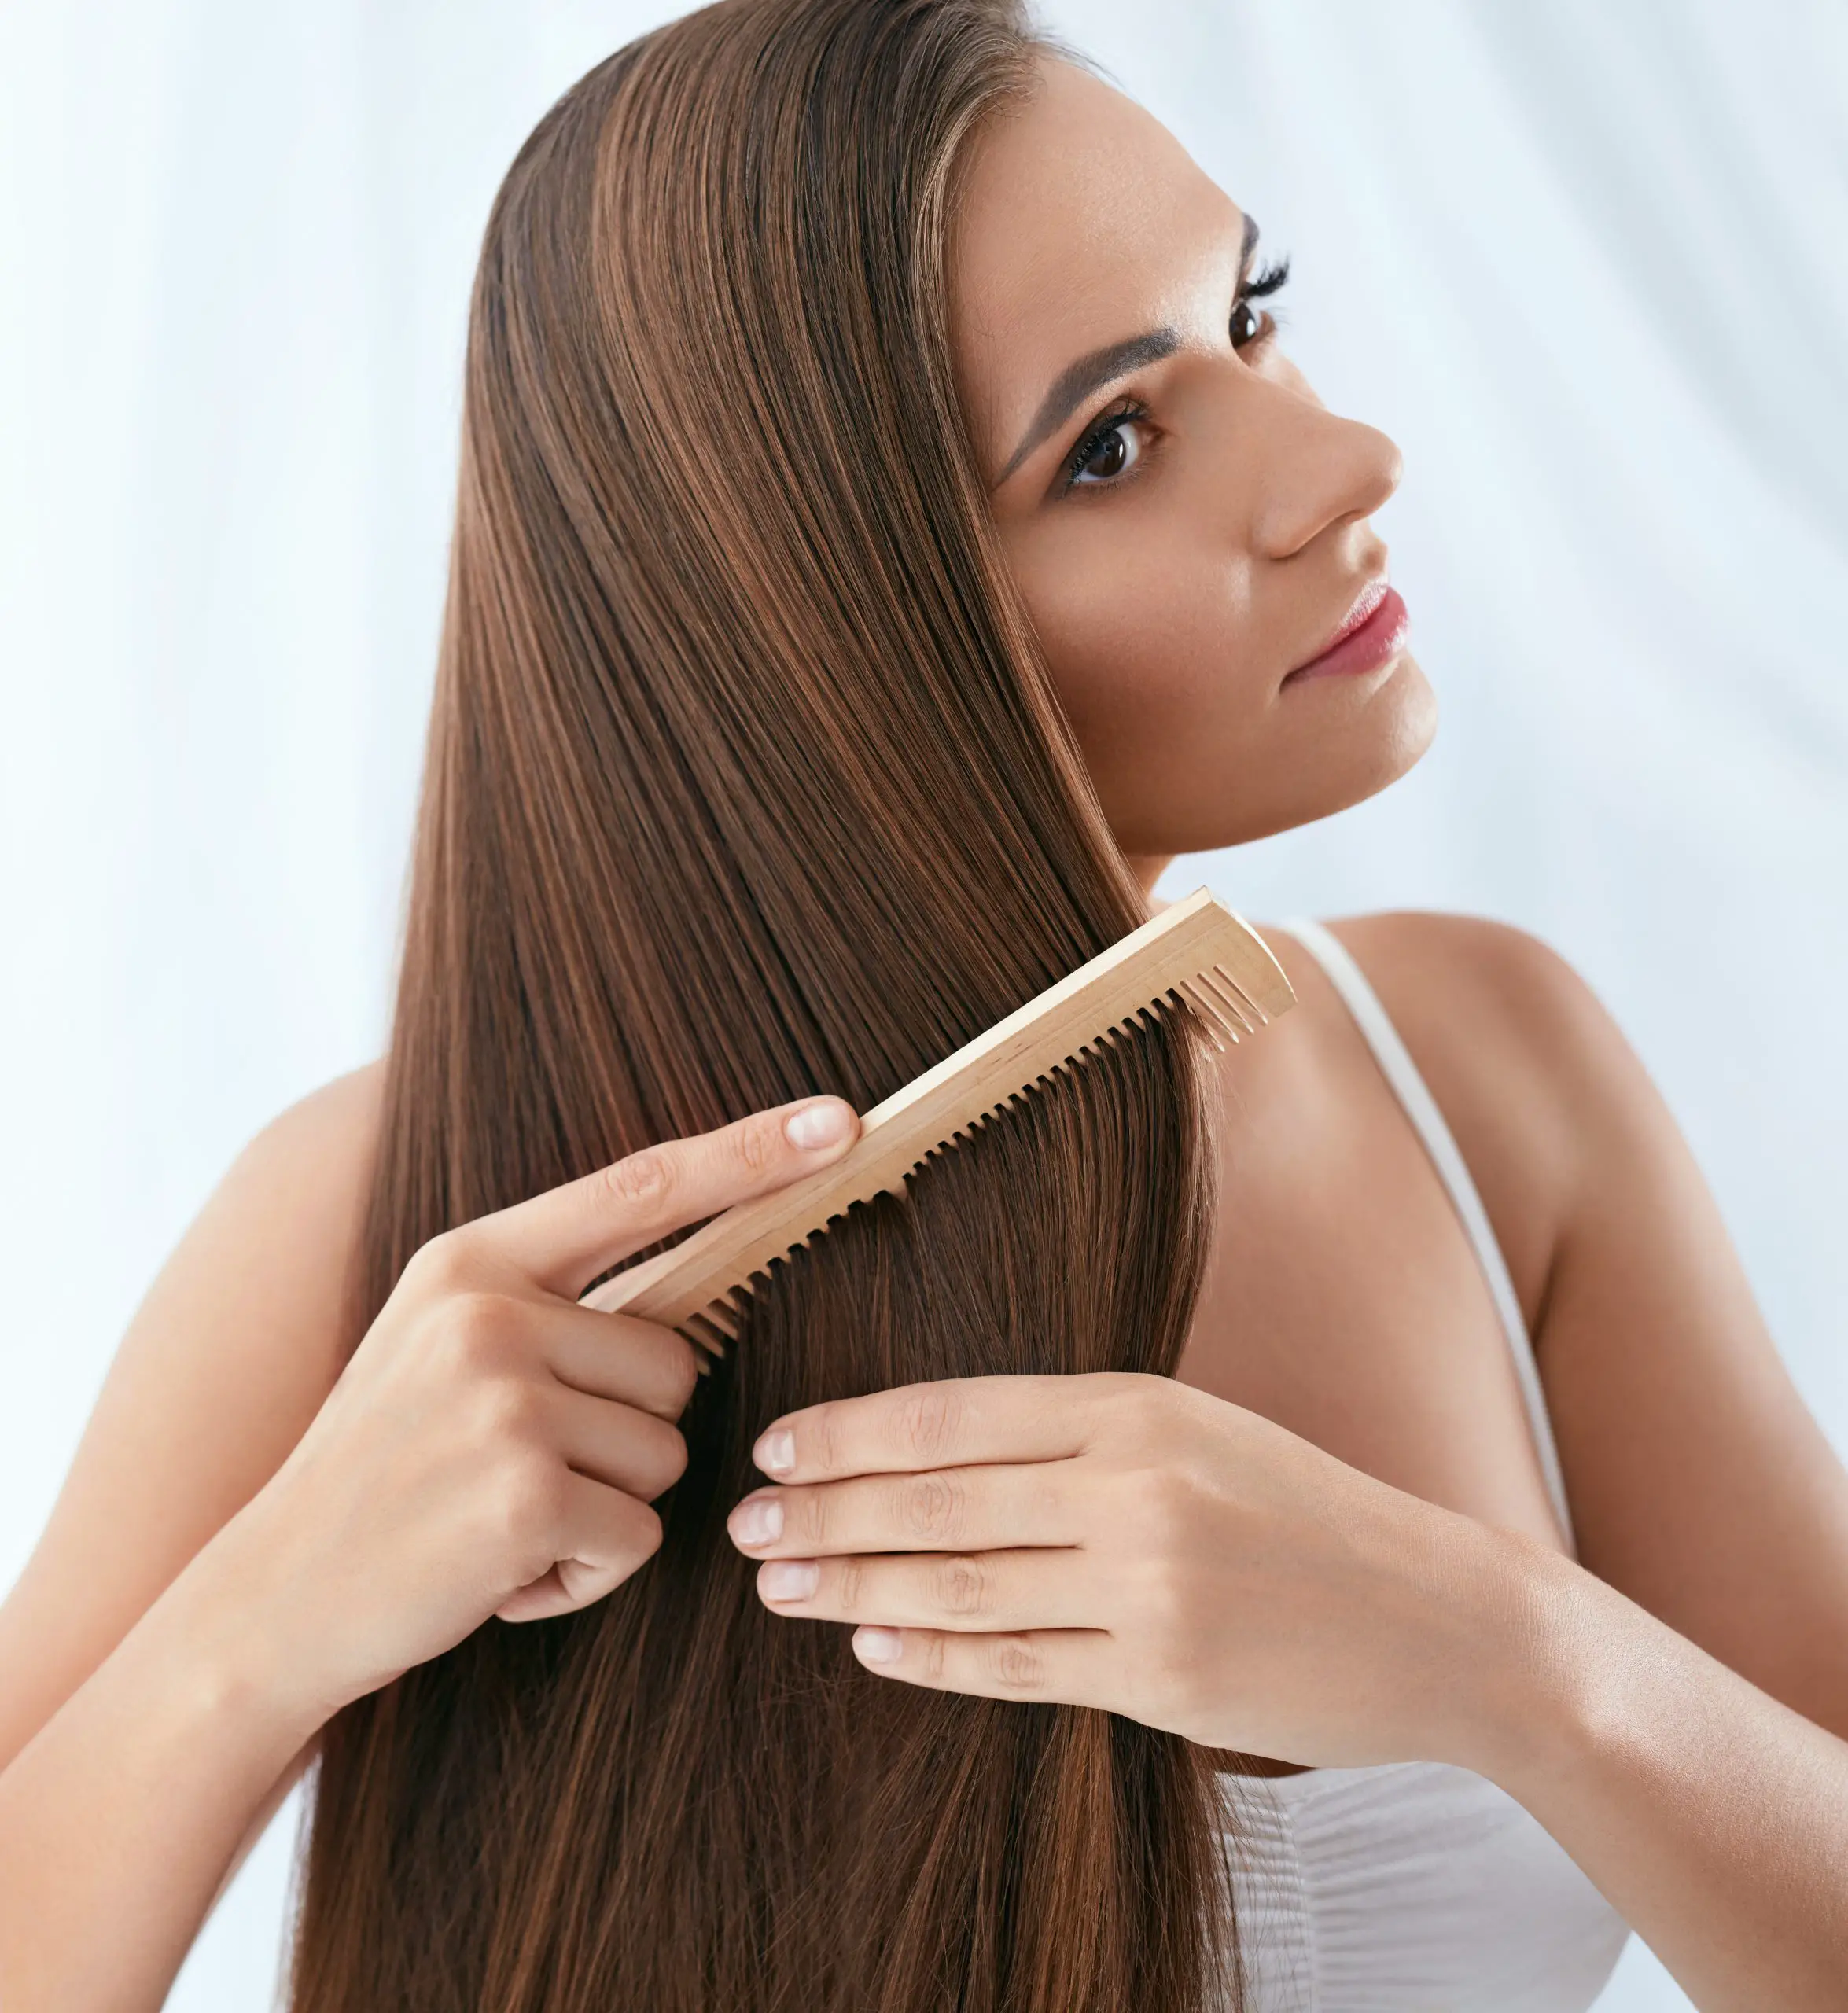 Expert Tips on How to Grow Hair Faster Naturally At Home